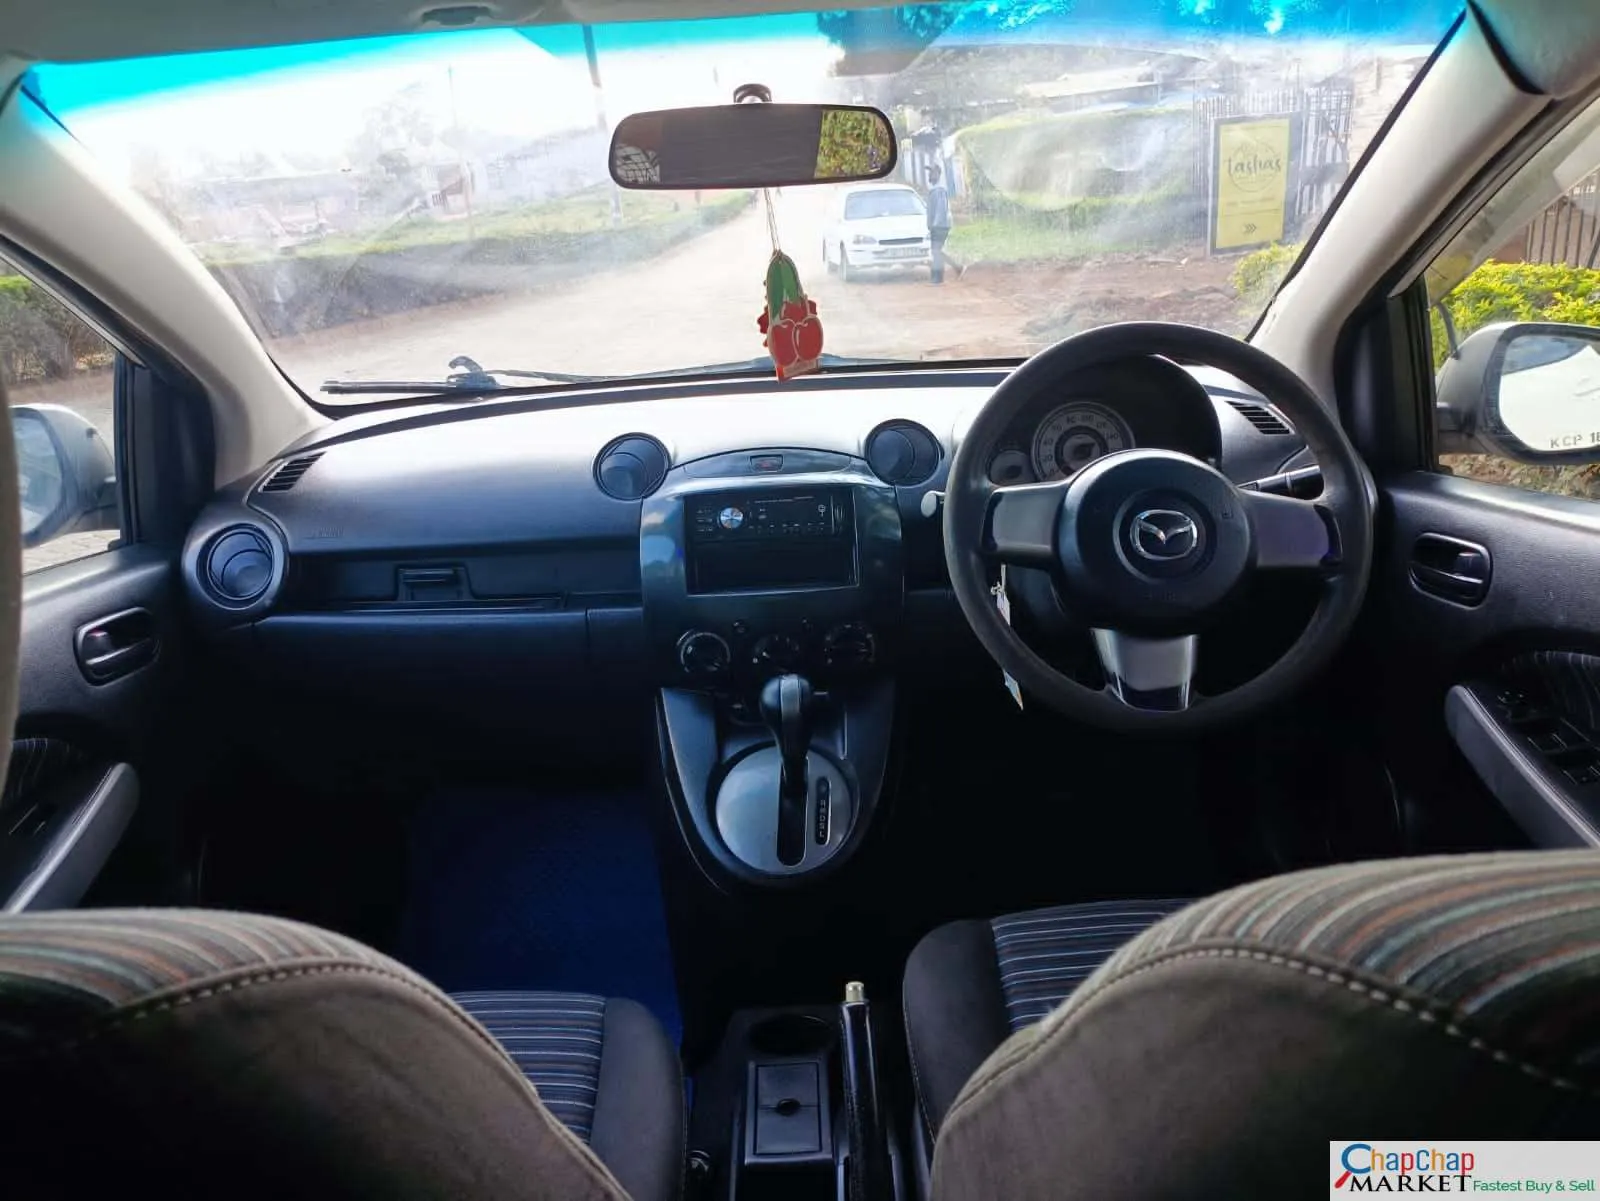 Mazda Demio 🔥 🔥 You Pay 30% DEPOSIT TRADE IN OK EXCLUSIVE demio for sale in kenya hire purchase installments